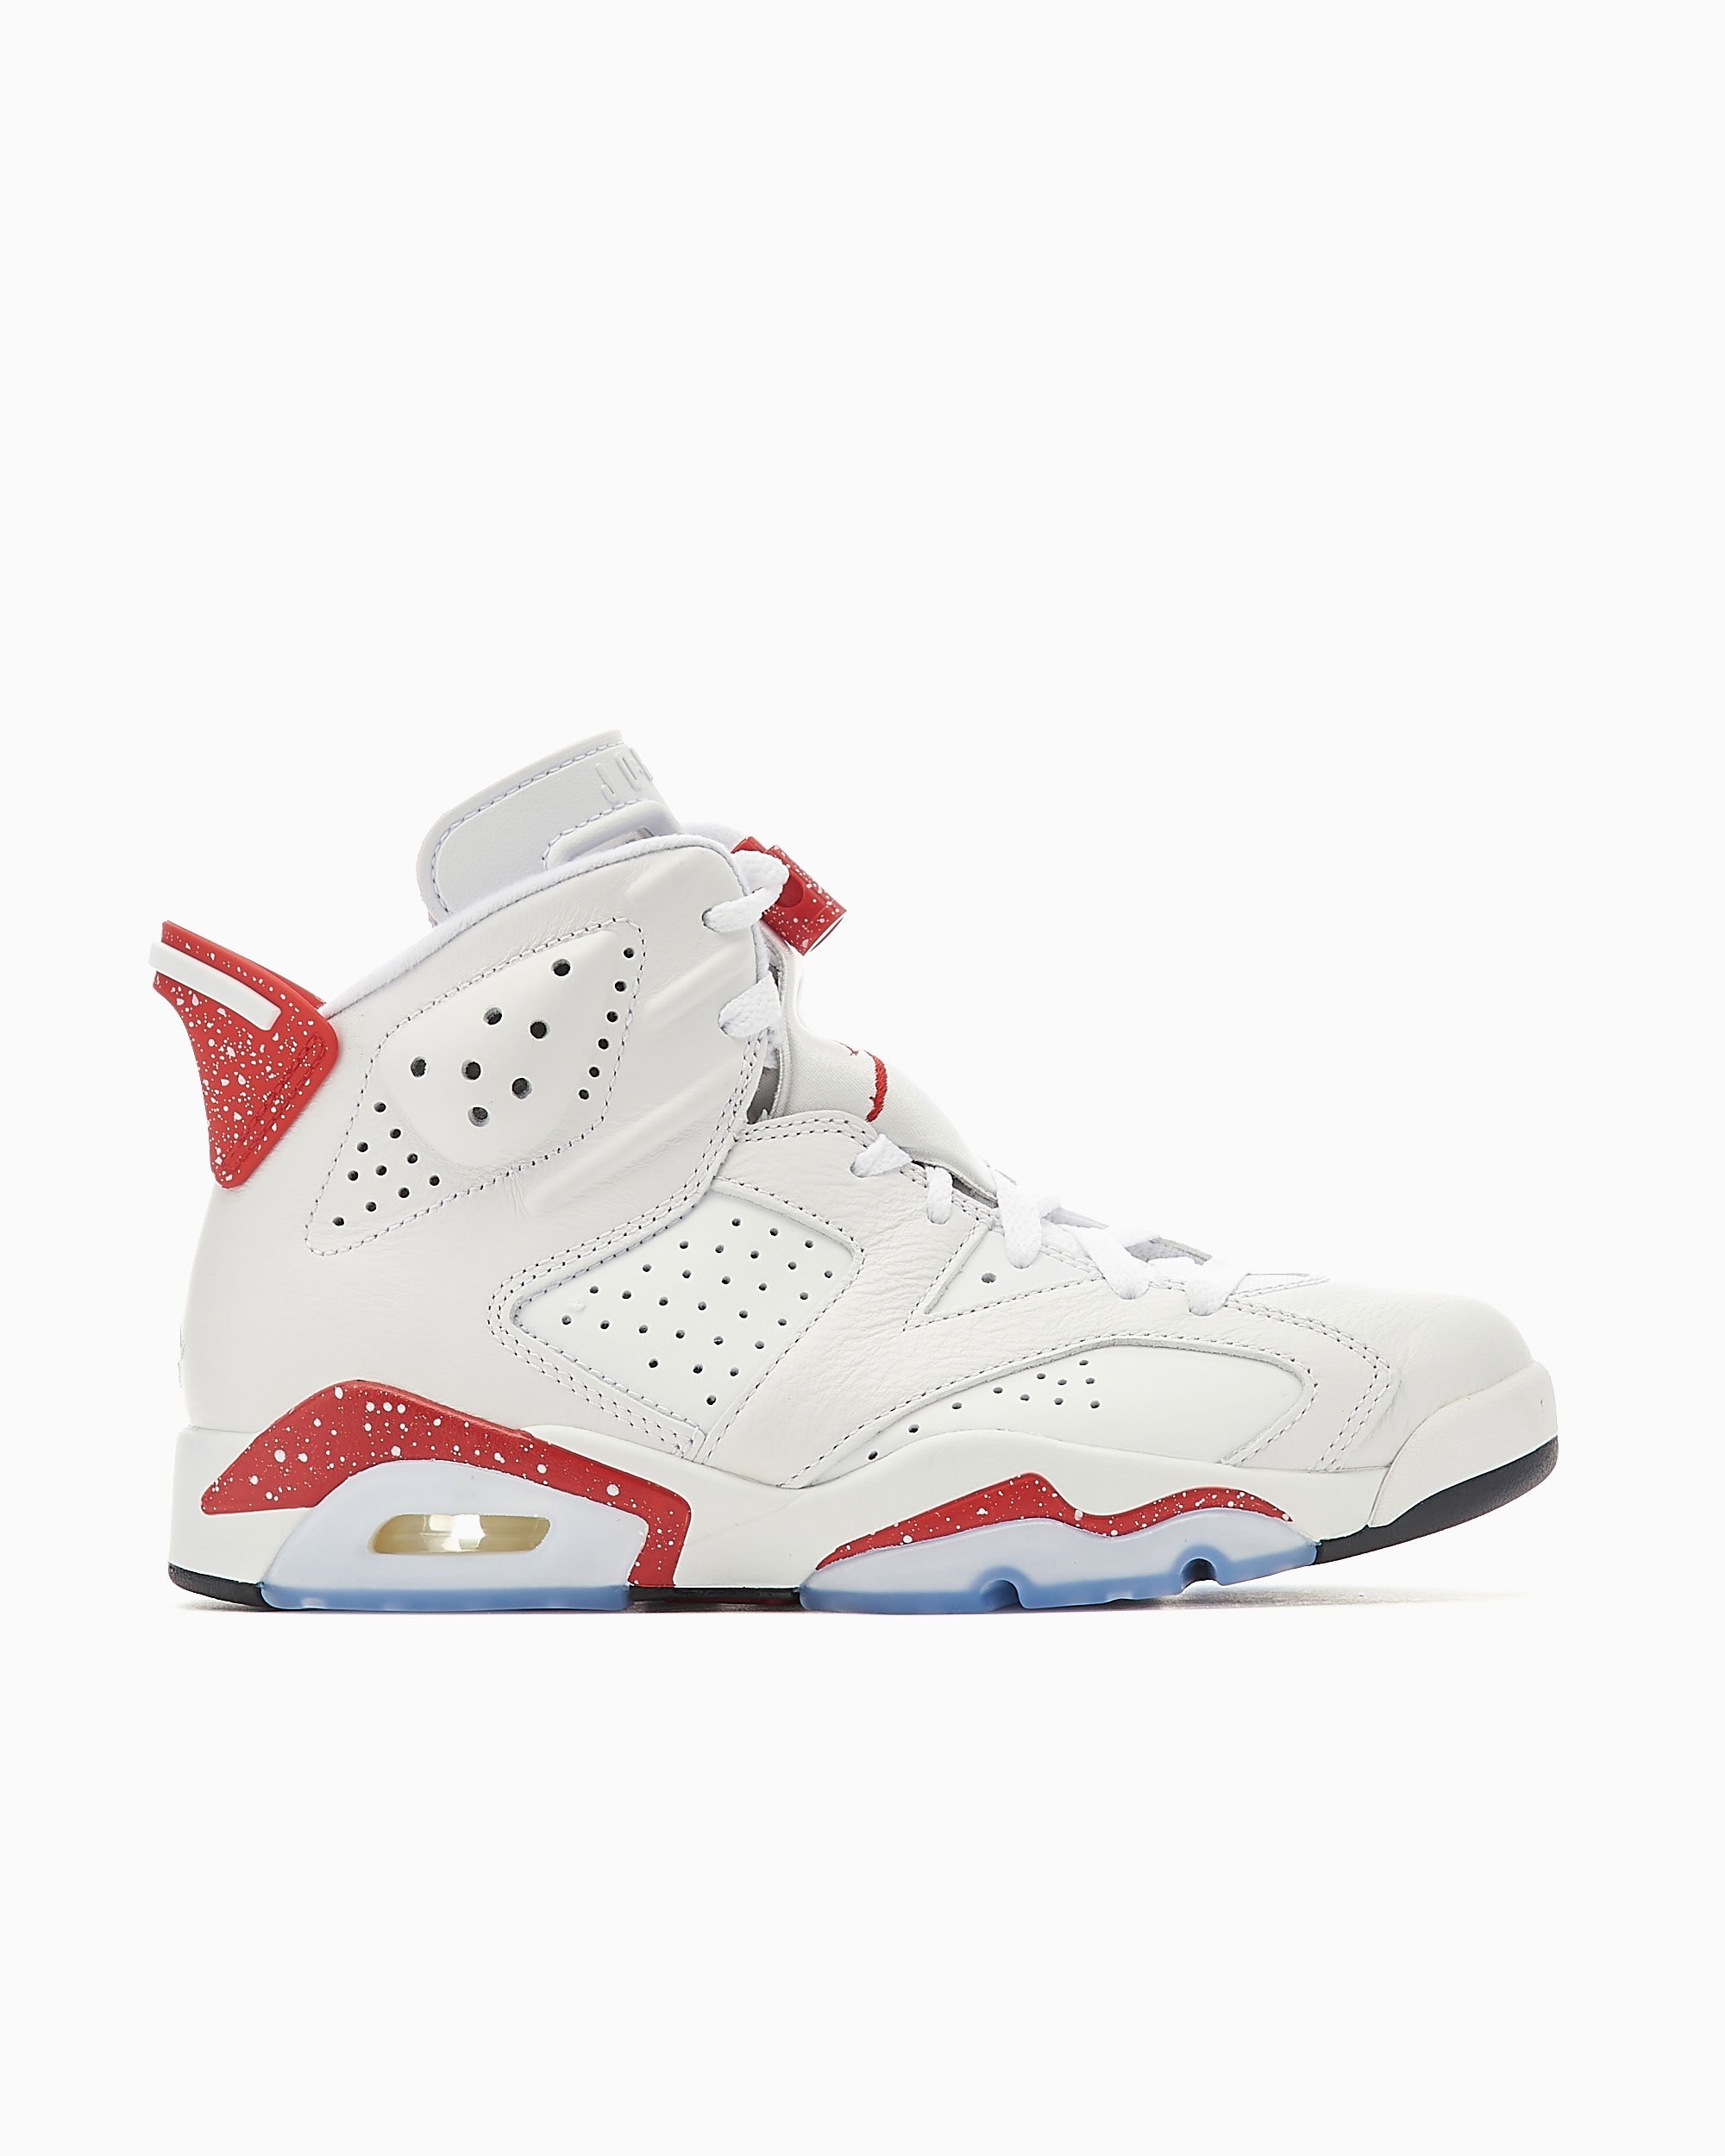 clone tomorrow Frosty Air Jordan 6 "Red Oreo" White CT8529-162| Buy Online at FOOTDISTRICT